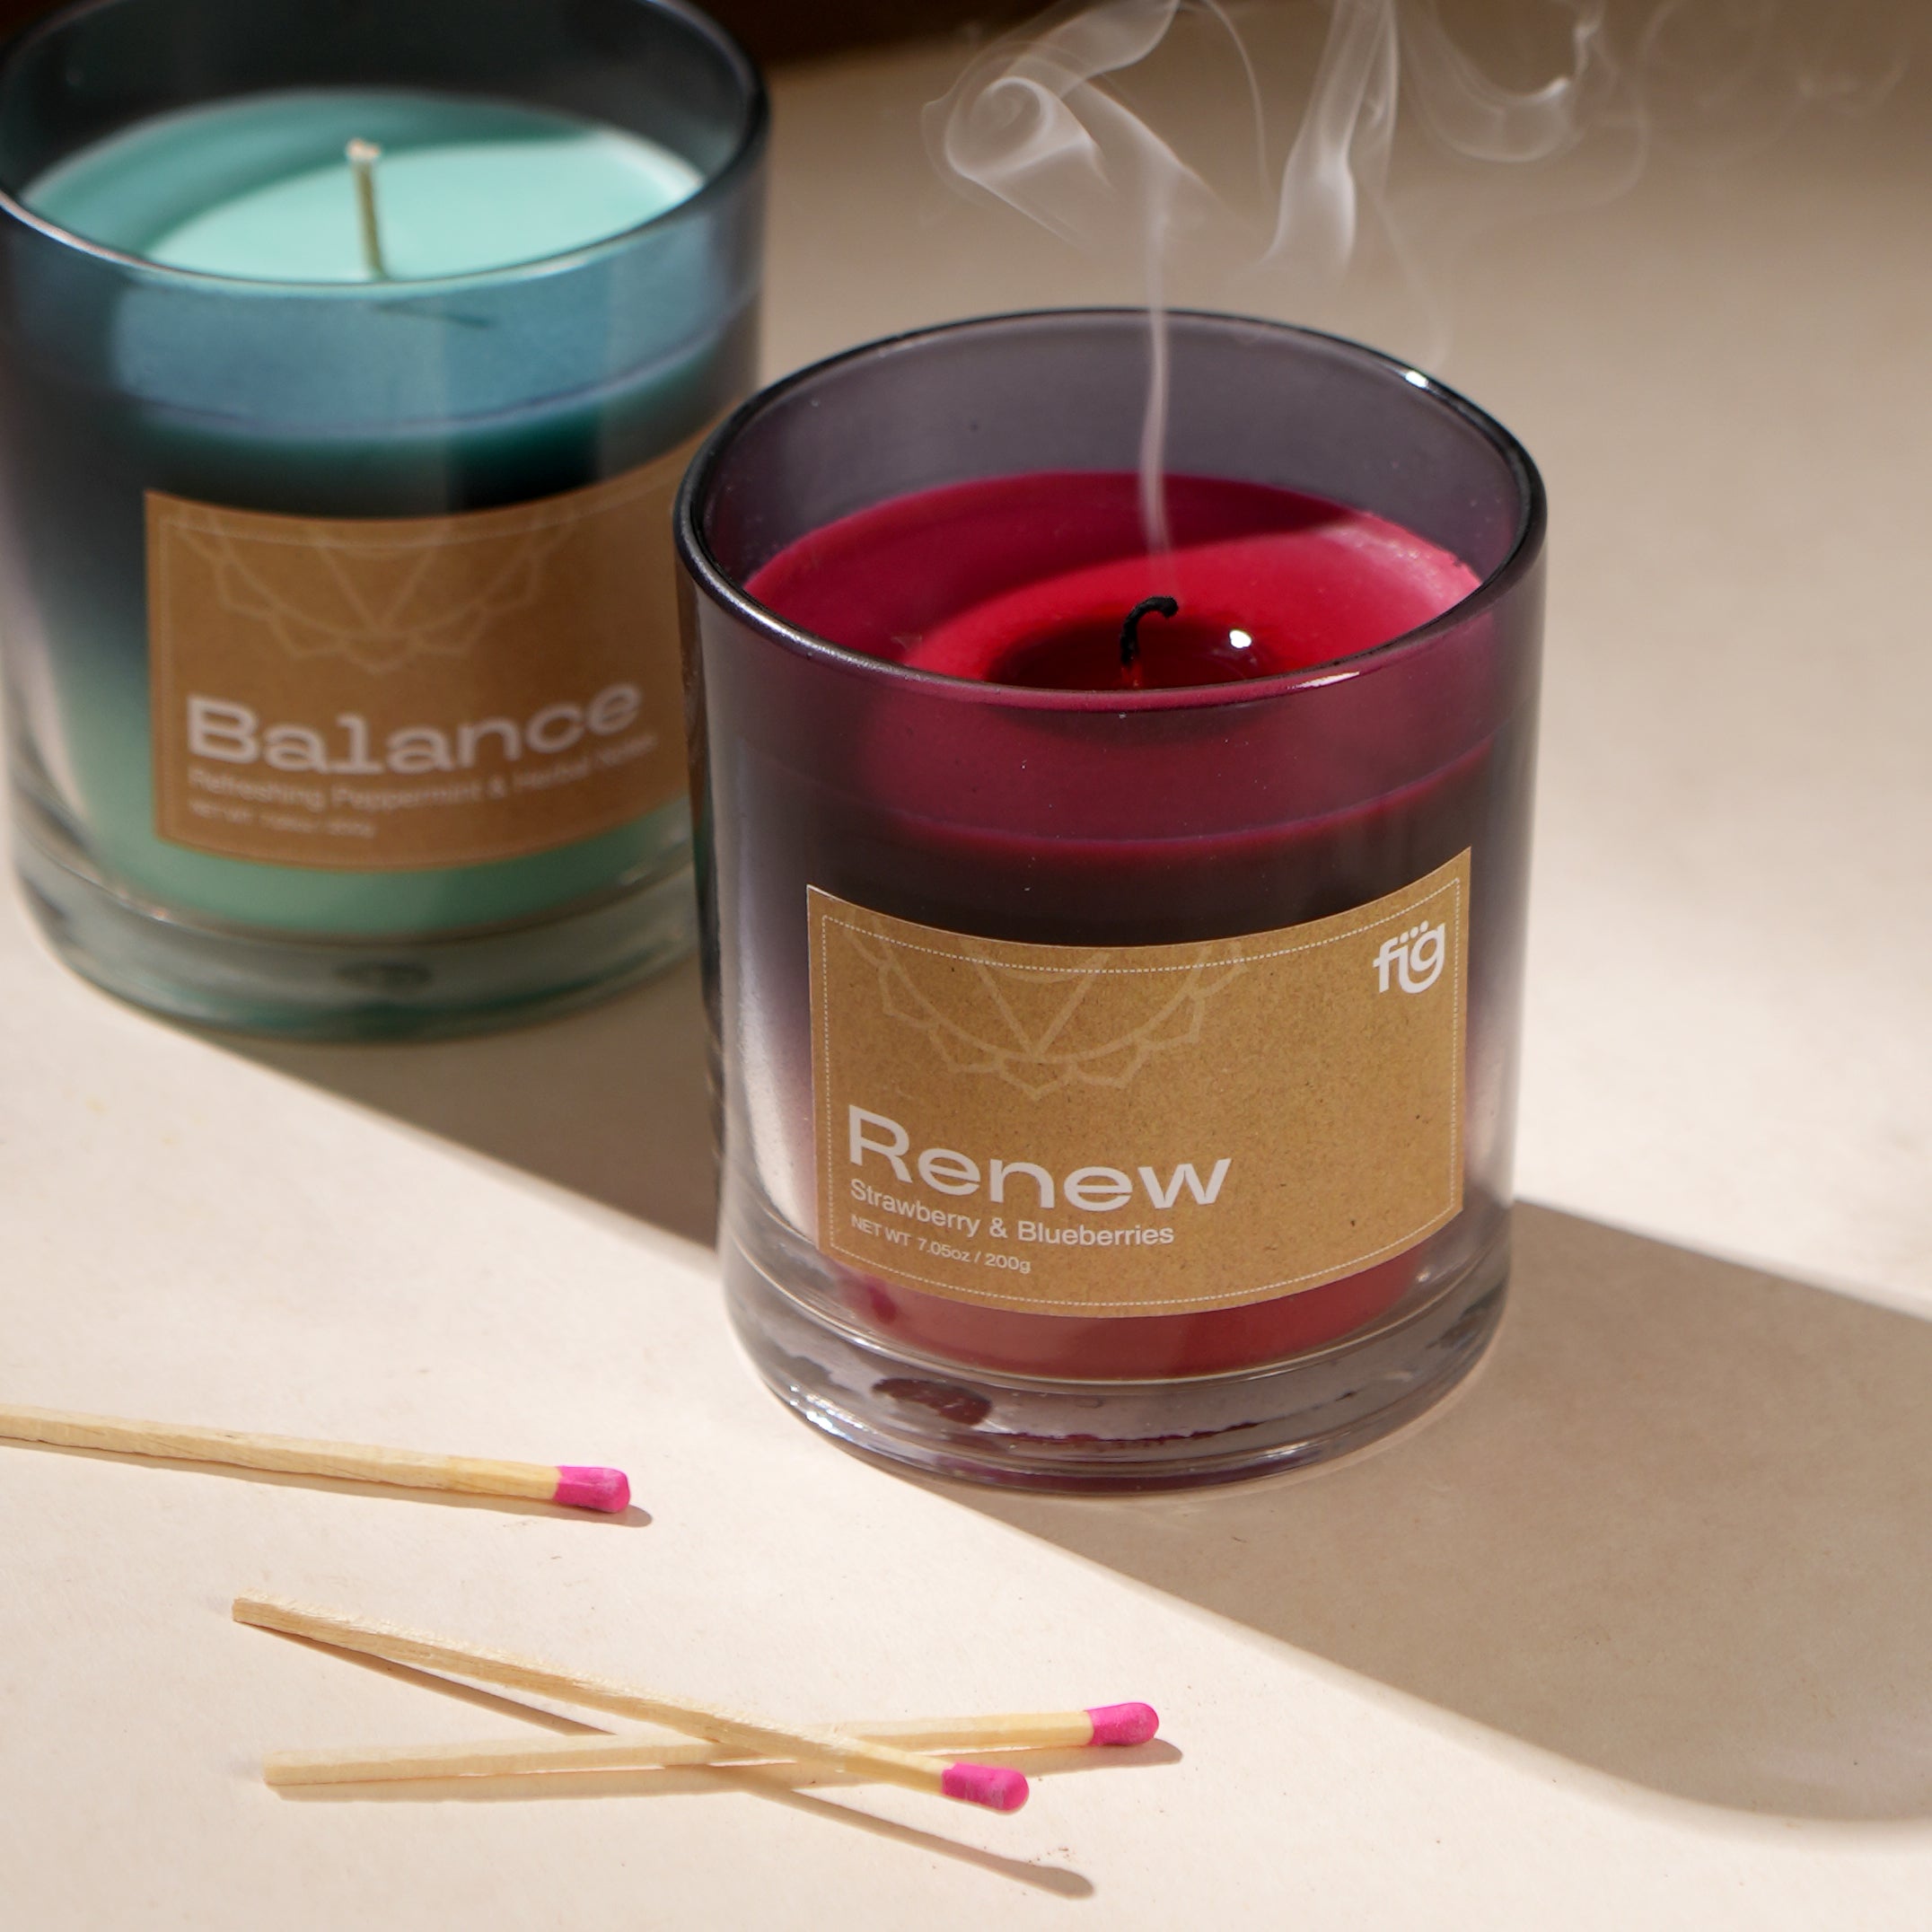 Renew Berries Vegan Scented Candle - Palm Wax Scented